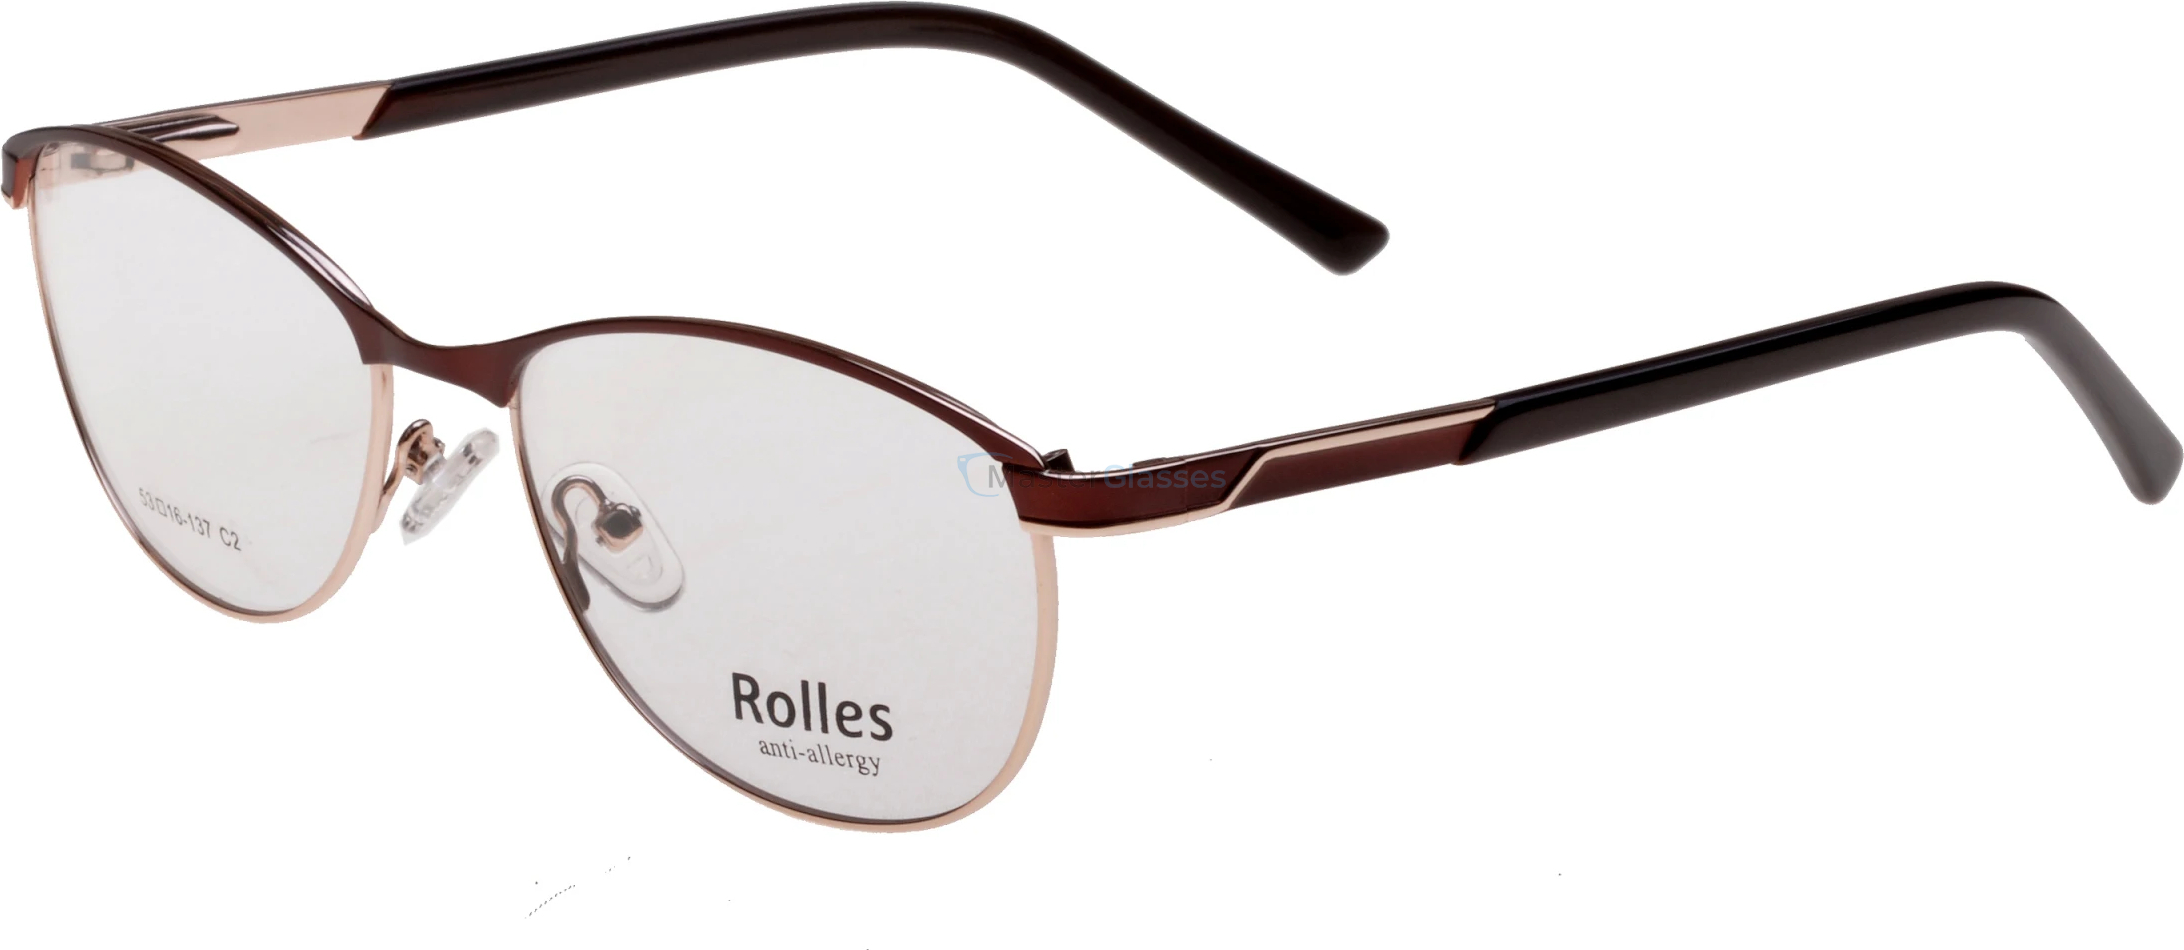  Rolles 350 02